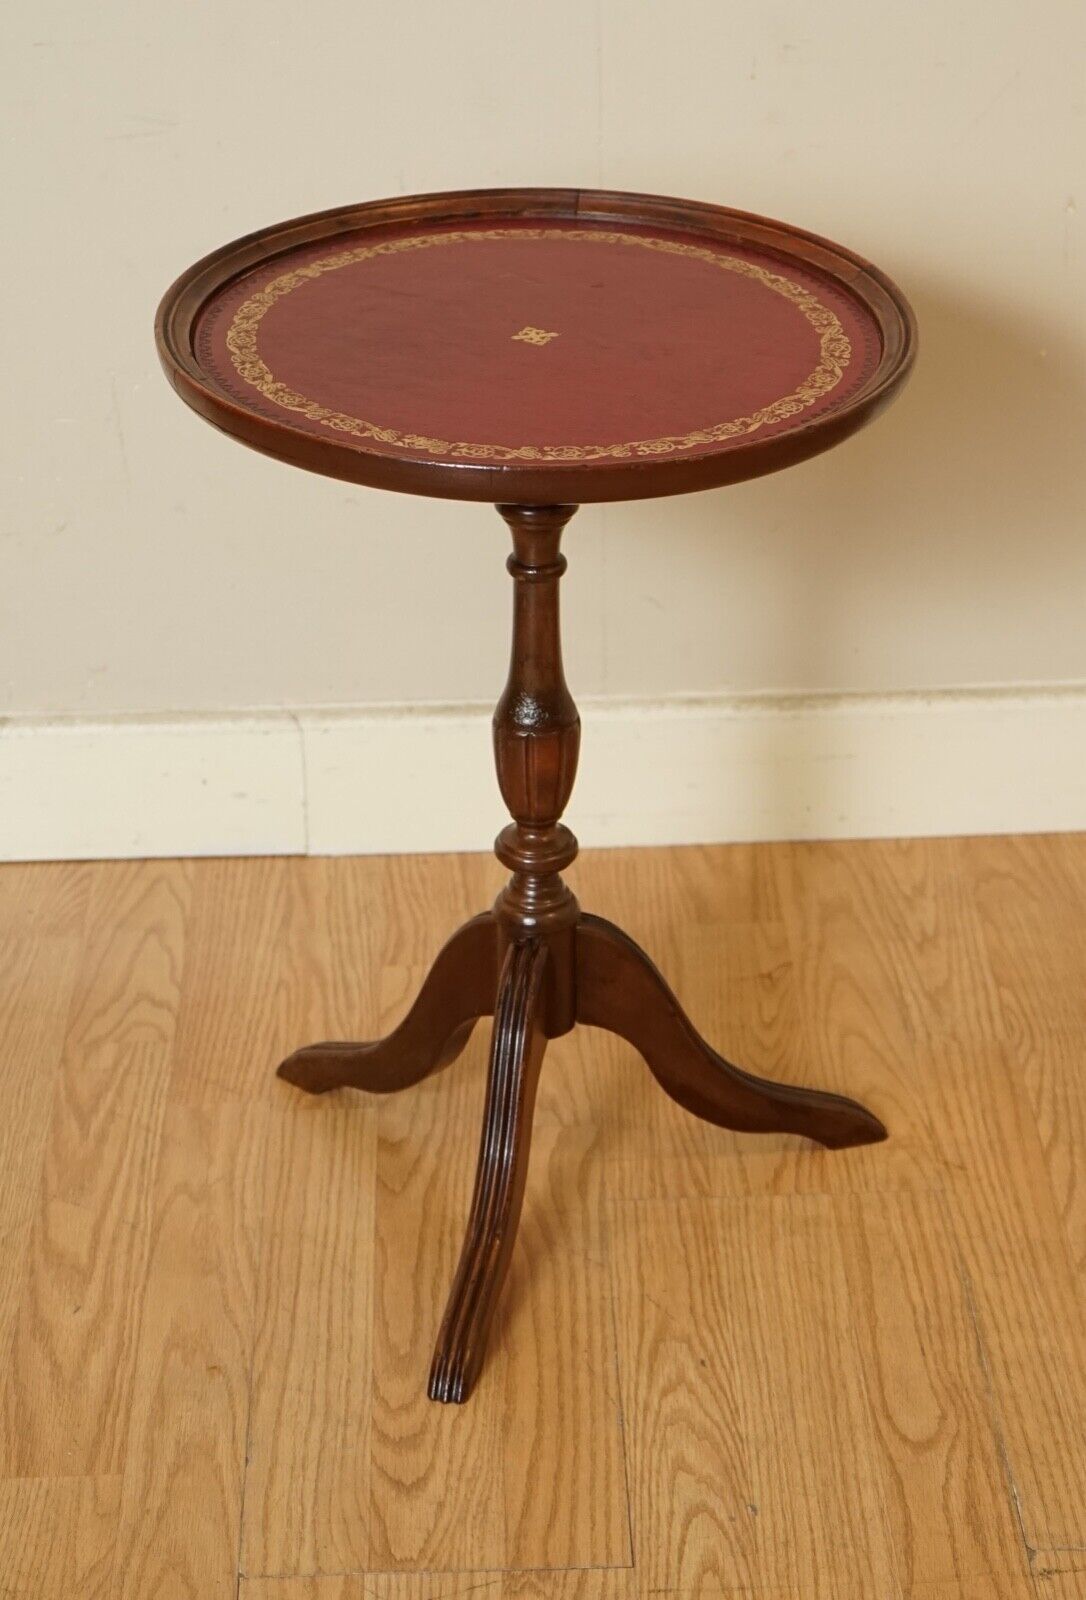 LOVELY VINTAGE SIDE END PLANT SIDE TABLE WITH RED LEATHER EMBOSSED TOP